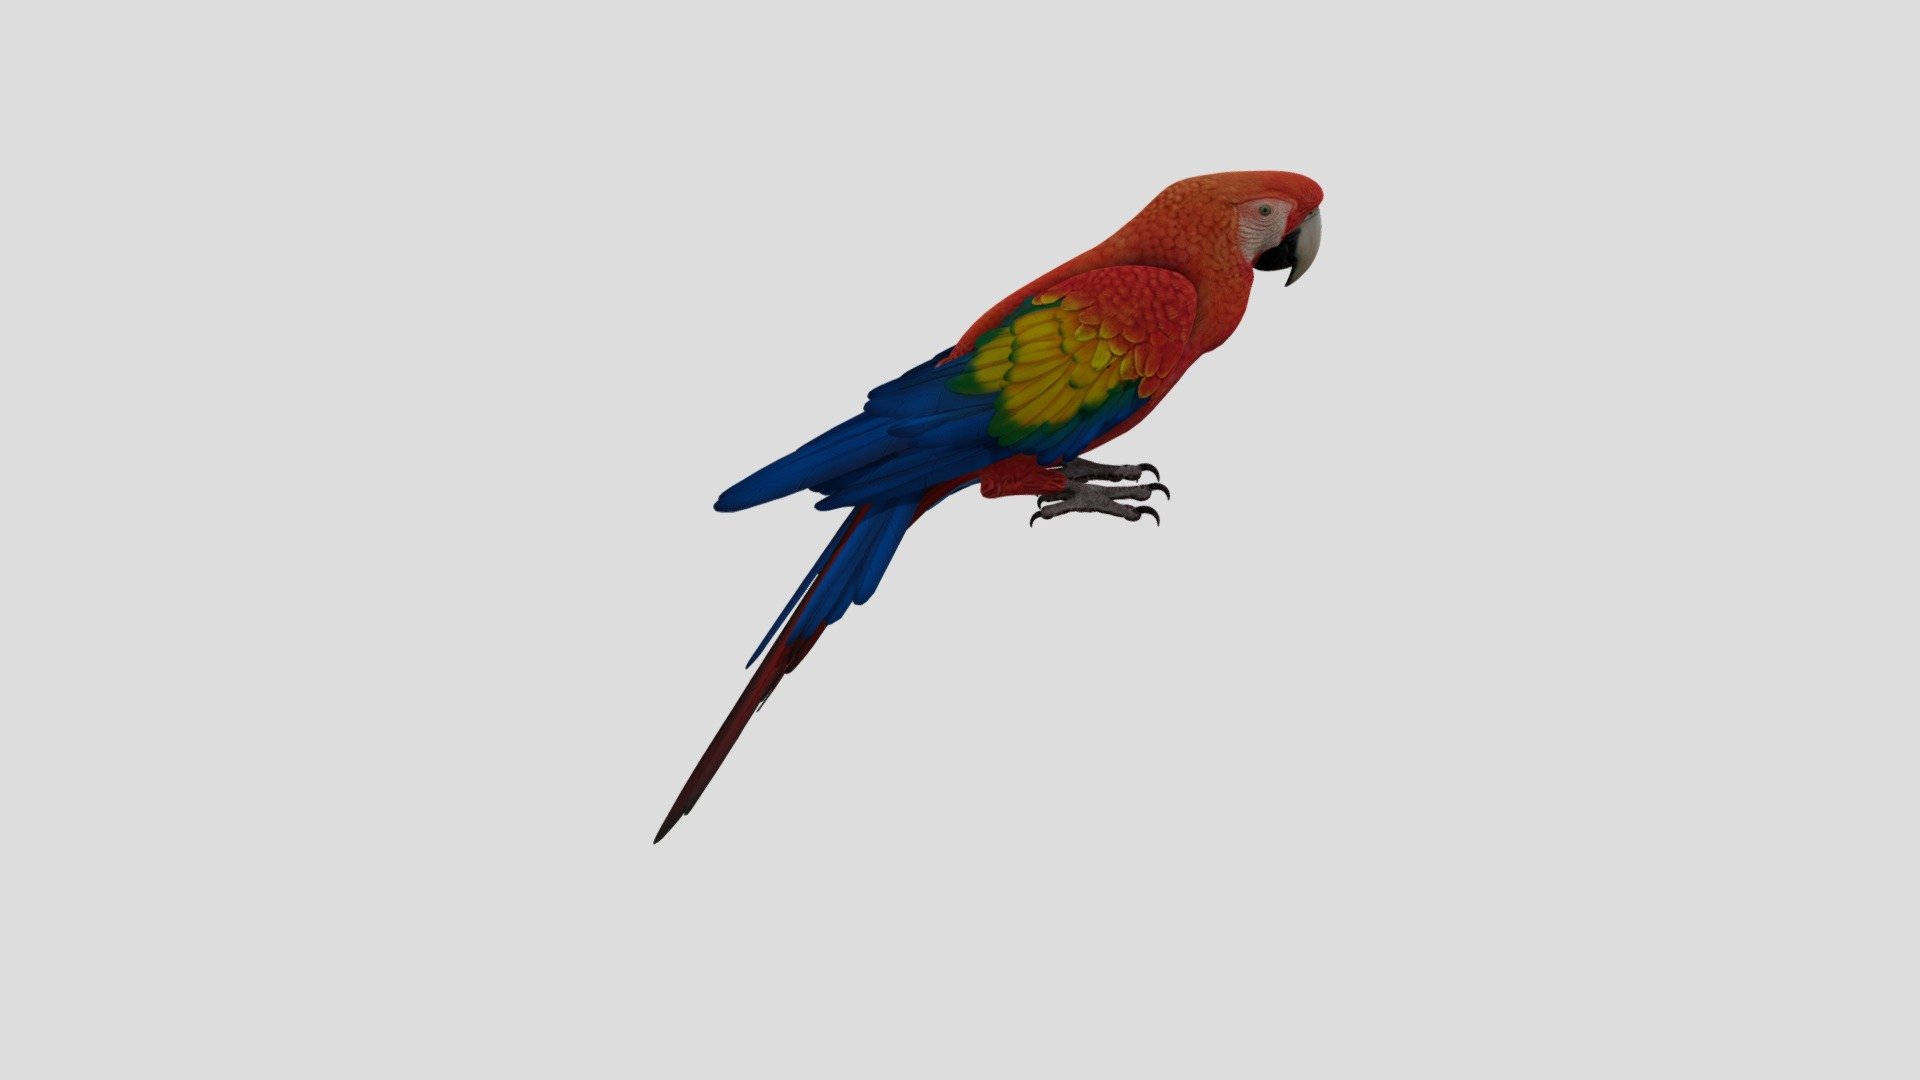 Kingdom:Animalia
Phylum:Chordata
Class:  Aves
Clade:Psittacopasserae
Order:Psittaciformes

Parrots, also known as psittacines, are birds of the roughly 398 species in 92 genera comprising the order Psittaciformes , found mostly in tropical and subtropical regions. The order is subdivided into three superfamilies: the Psittacoidea , the Cacatuoidea , and the Strigopoidea .  Parrots have a generally pantropical distribution with several species inhabiting temperate regions in the Southern Hemisphere, as well. The greatest diversity of parrots is in South America and Australasia.
Measures taken to conserve the habitats of some high-profile charismatic species have also protected many of the less charismatic species living in the same ecosystems.The greatest diversity of parrots is in South America and Australasia.Parrots Are 59 Million years Old.Parrots Are Critically Endangered species.No Threts Of Hunting and Poaching are possible in present day.

Source : Wikedia

Thanks To Blender

Inspiration Of 3D Veiwer 3d model